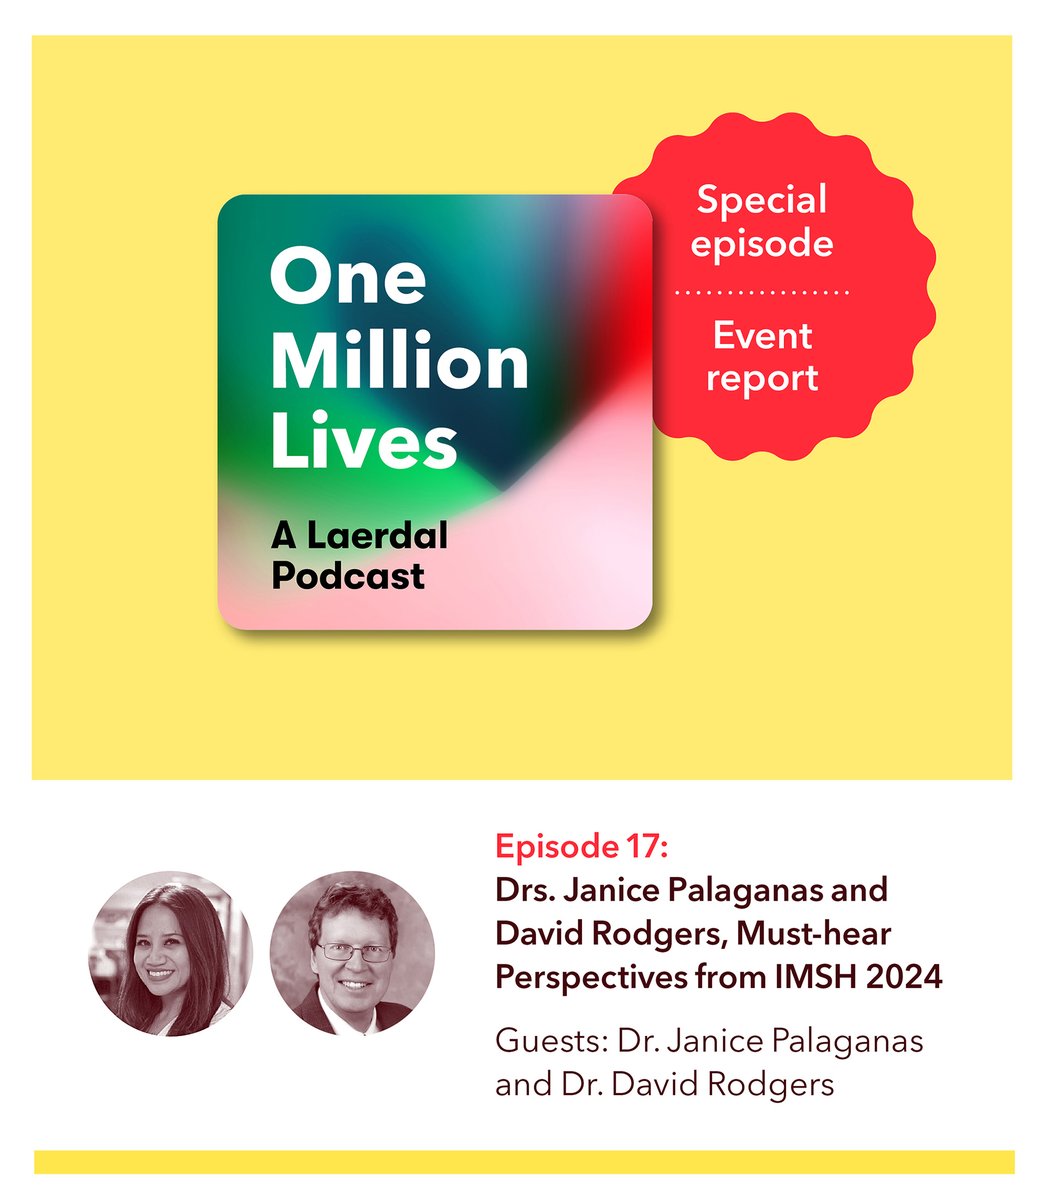 Are you curious about AI-driven scenarios or innovative debriefing approaches? Tune in to episode 17 #OneMillionLivesPodcast for the latest topics trending in #healthcaresimulation as discussed by leading field experts at #IMSH2024. 🎧ow.ly/9eGn50ReWeY #HelpingSaveLives